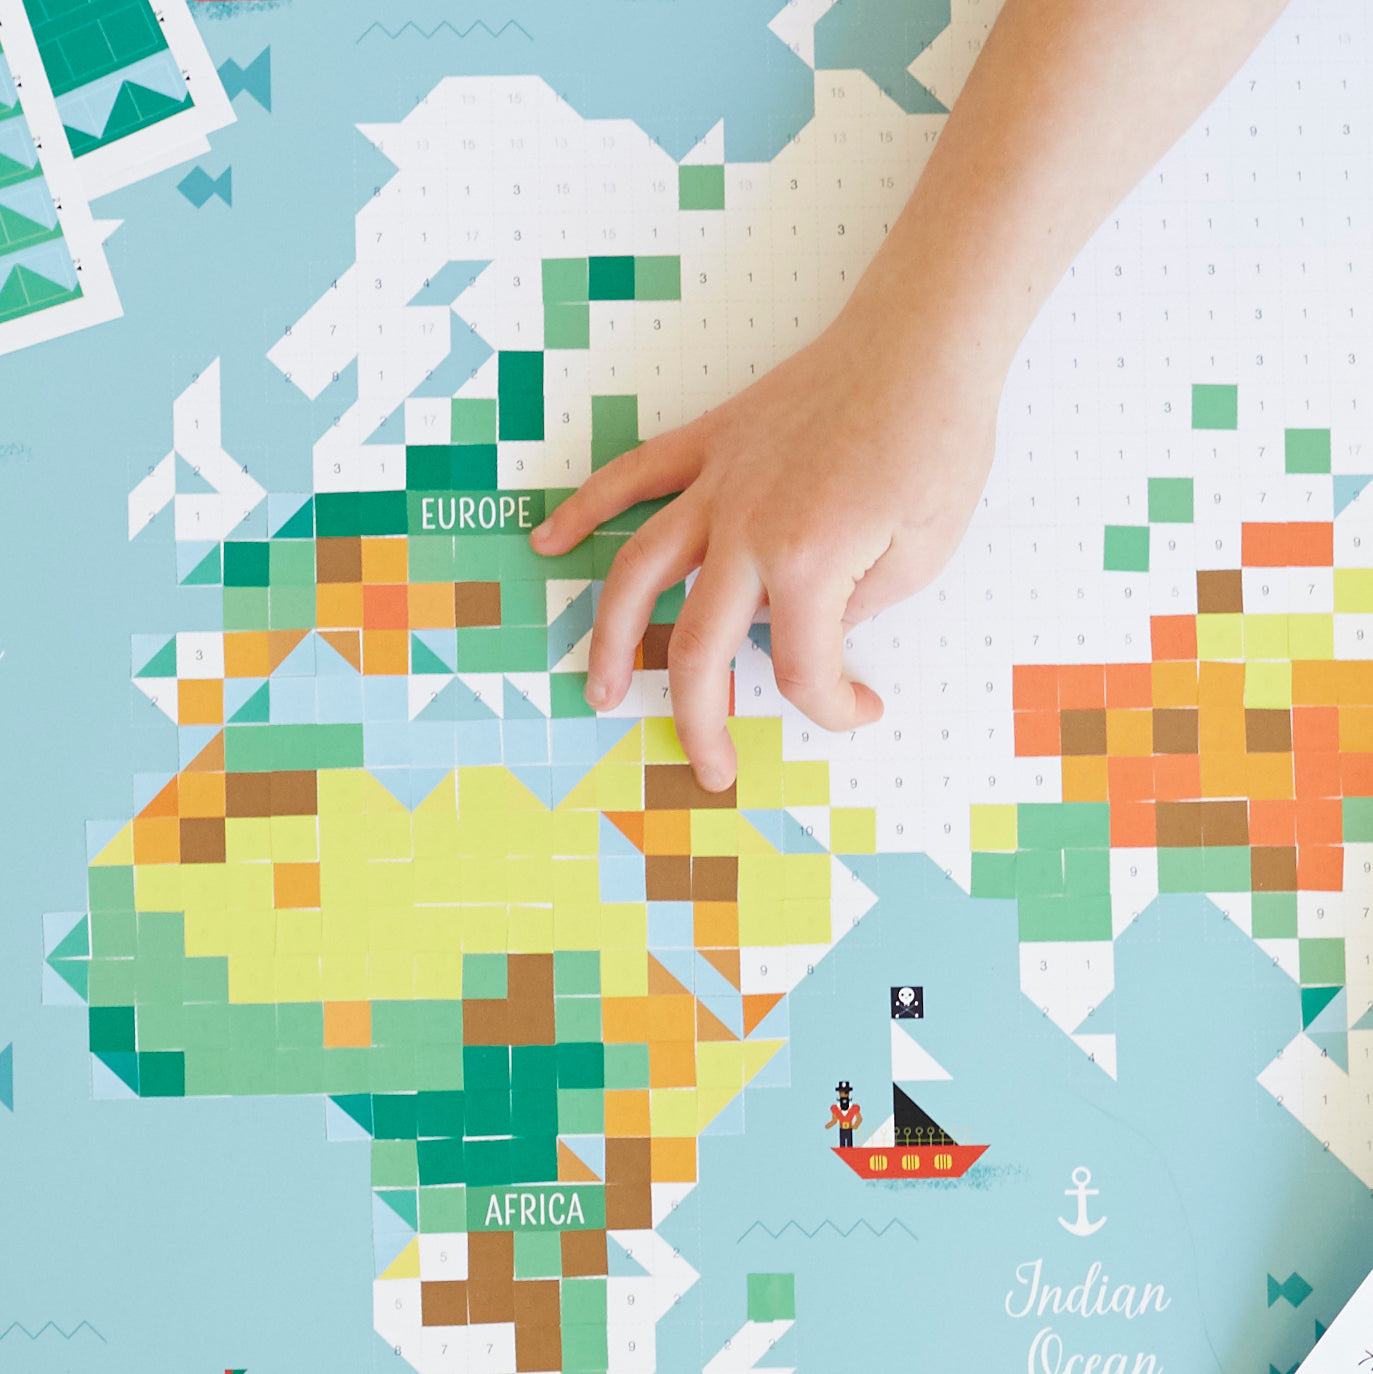 Large Poster with 1600 stickers - World Map